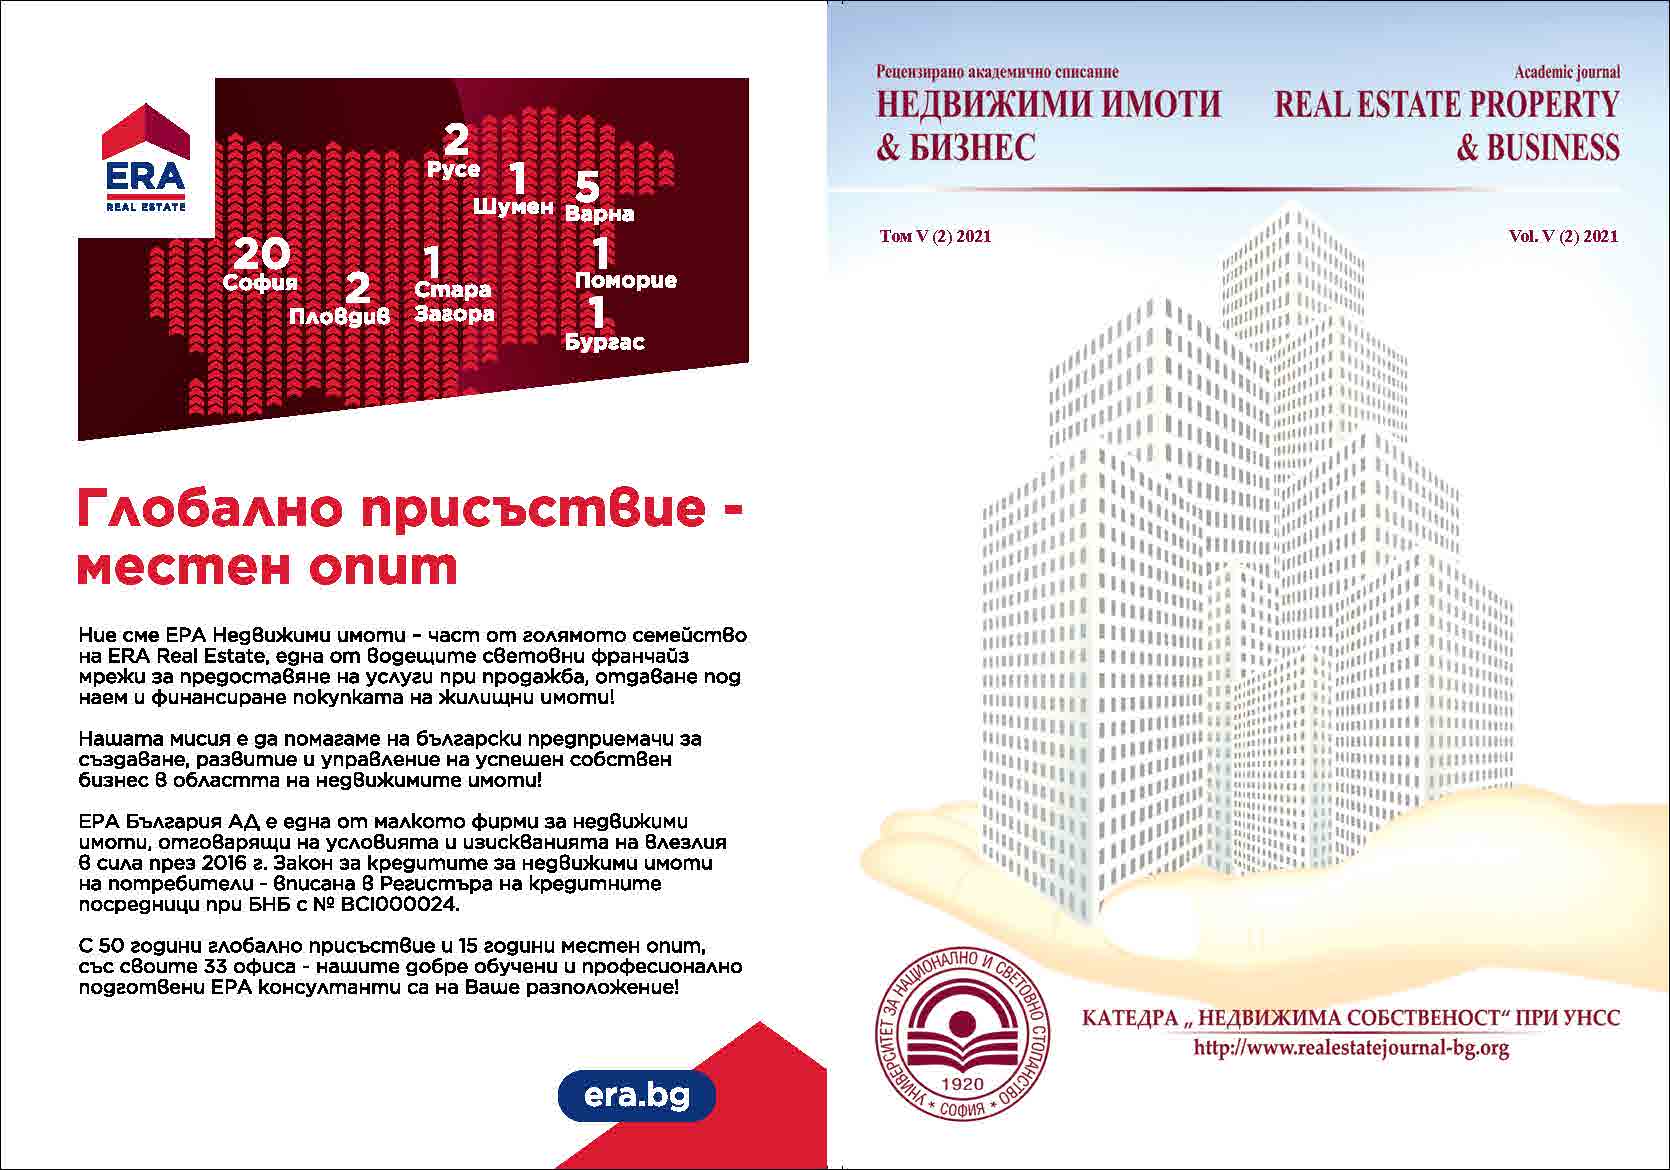 Analysis of Real Estate Income in the Budget of Super large Cities of Russia Cover Image